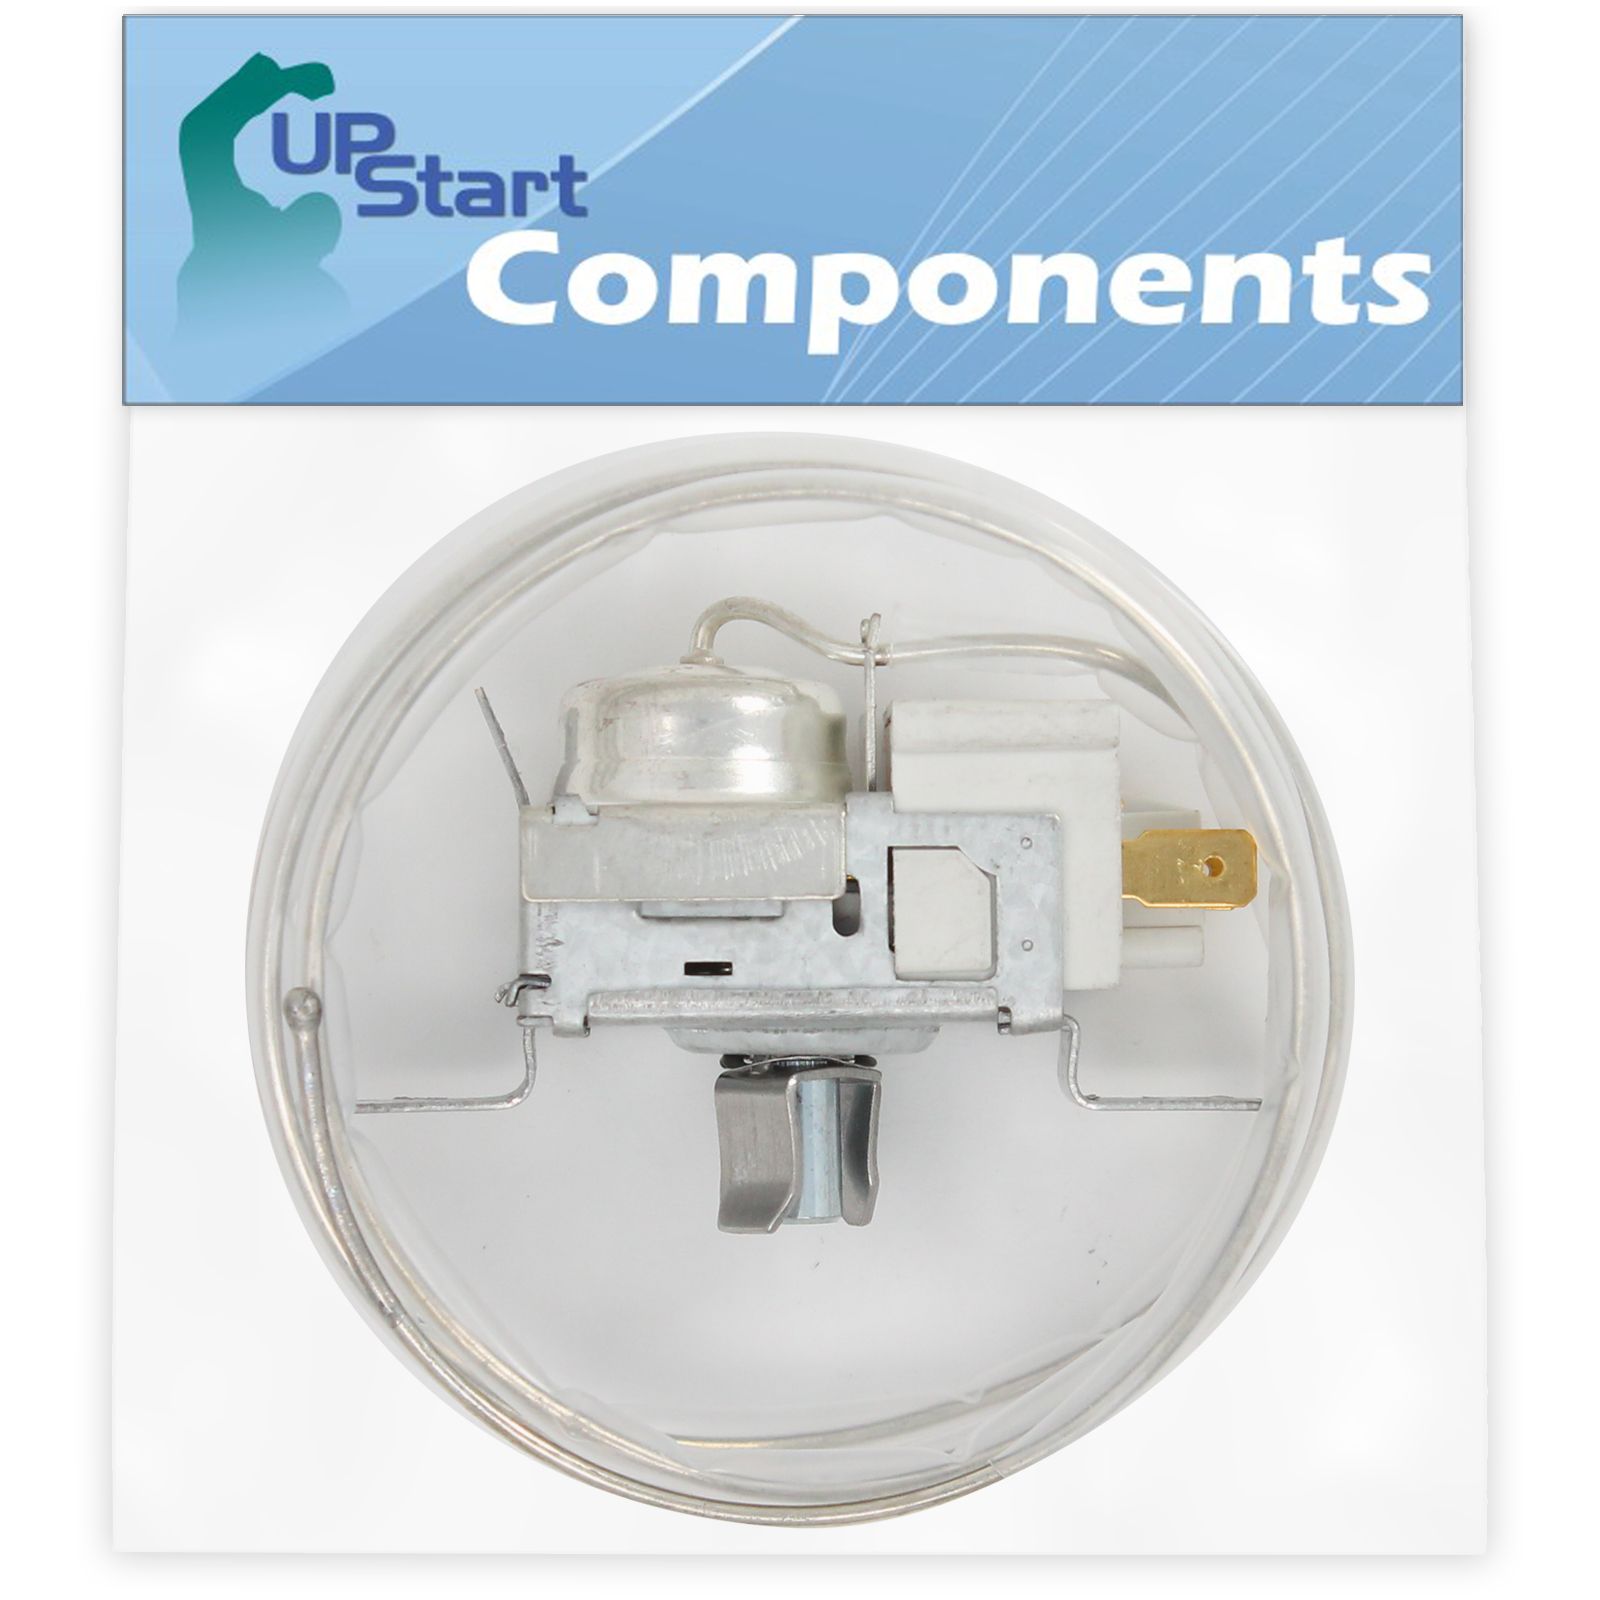 2198202 Cold Control Thermostat Replacement for Whirlpool ED22DQXEW00 Refrigerator - Compatible with WP2198202 Refrigerator Temperature Control Thermostat - UpStart Components Brand - image 1 of 3